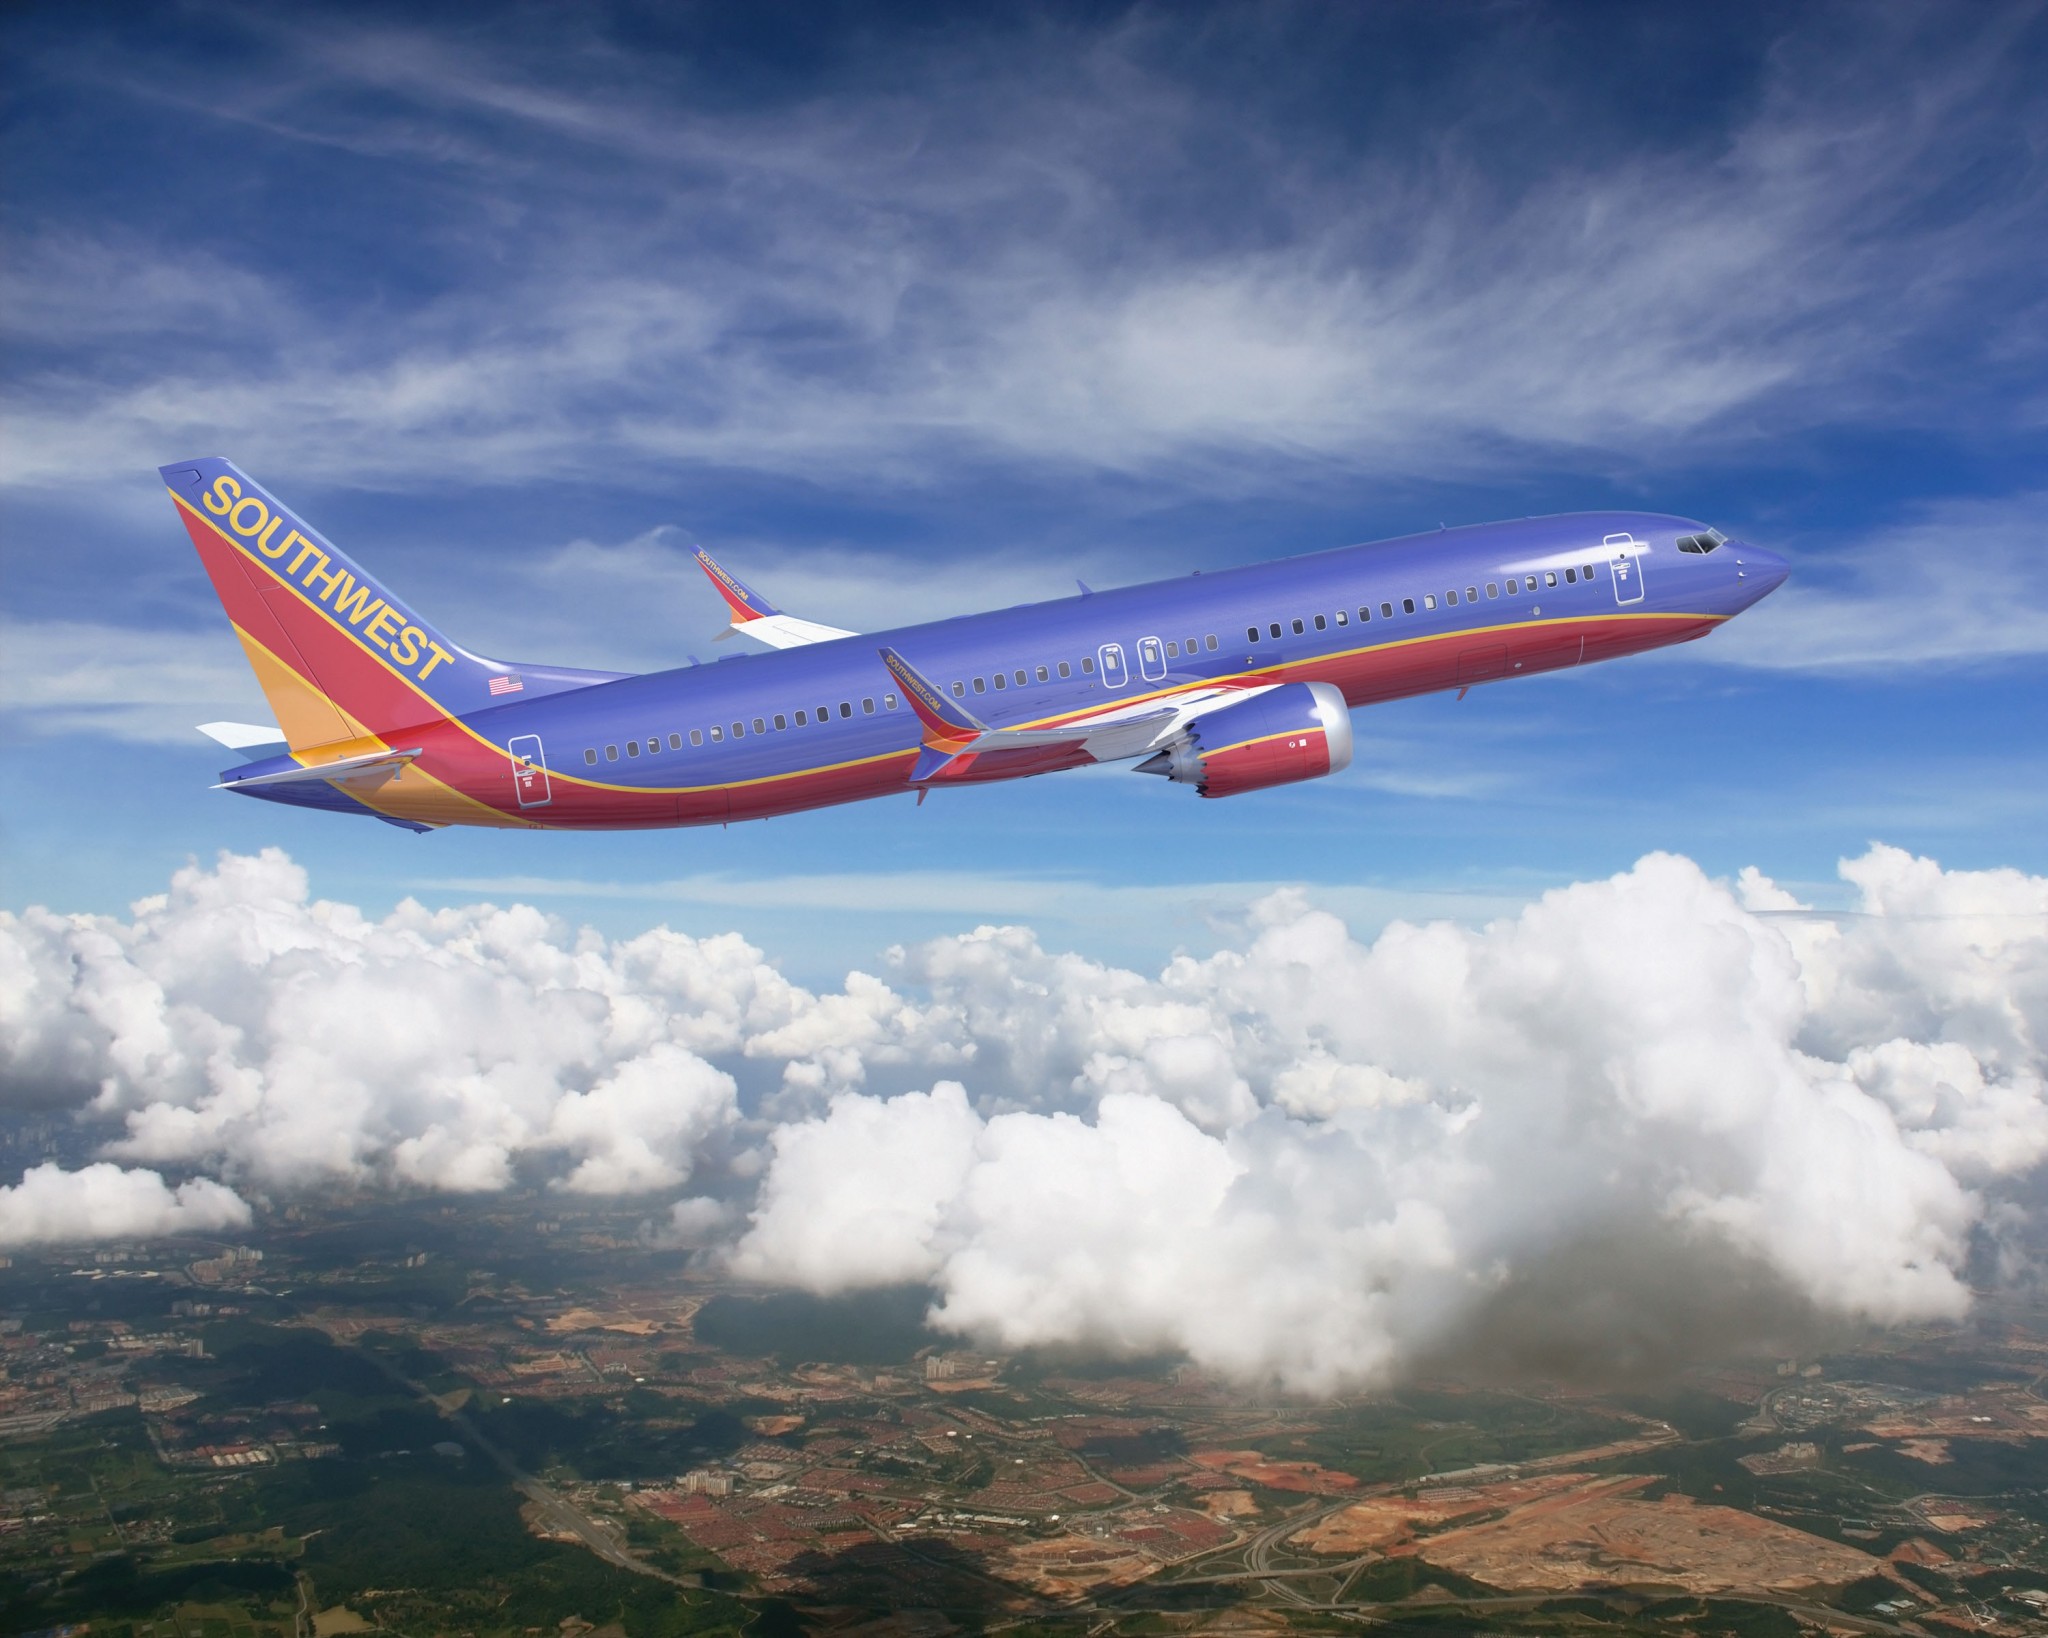 Southwest Airlines confirms accident